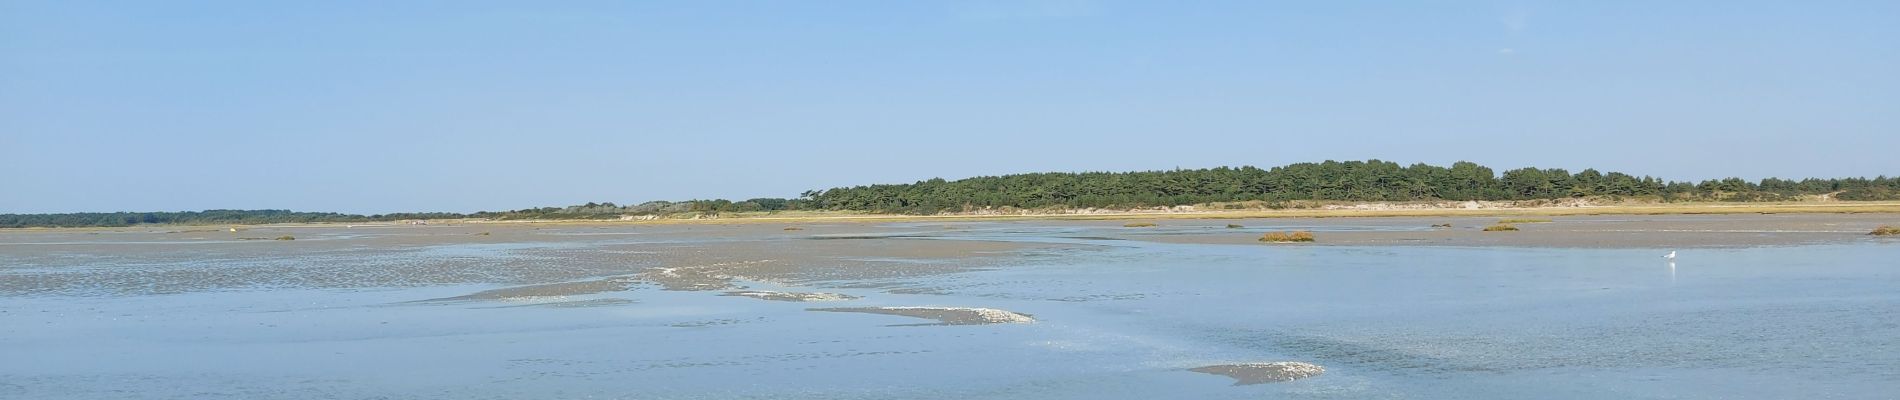 Trail Walking Le Crotoy - balade baie de somme - Photo